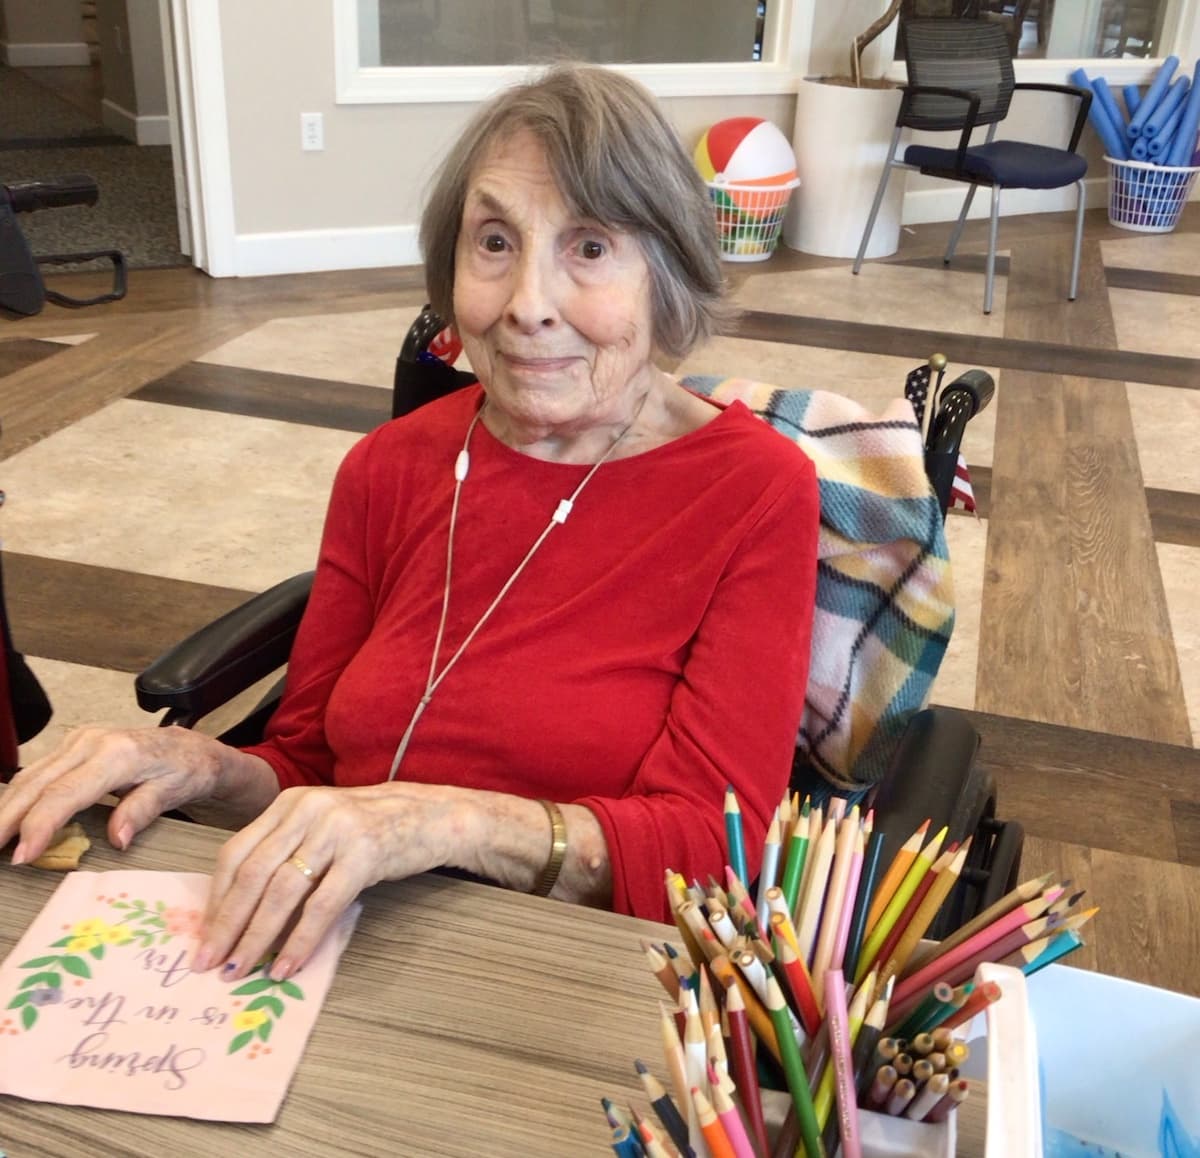 The Grandview of Chisholm Trail | Resident using colored pencils to create art